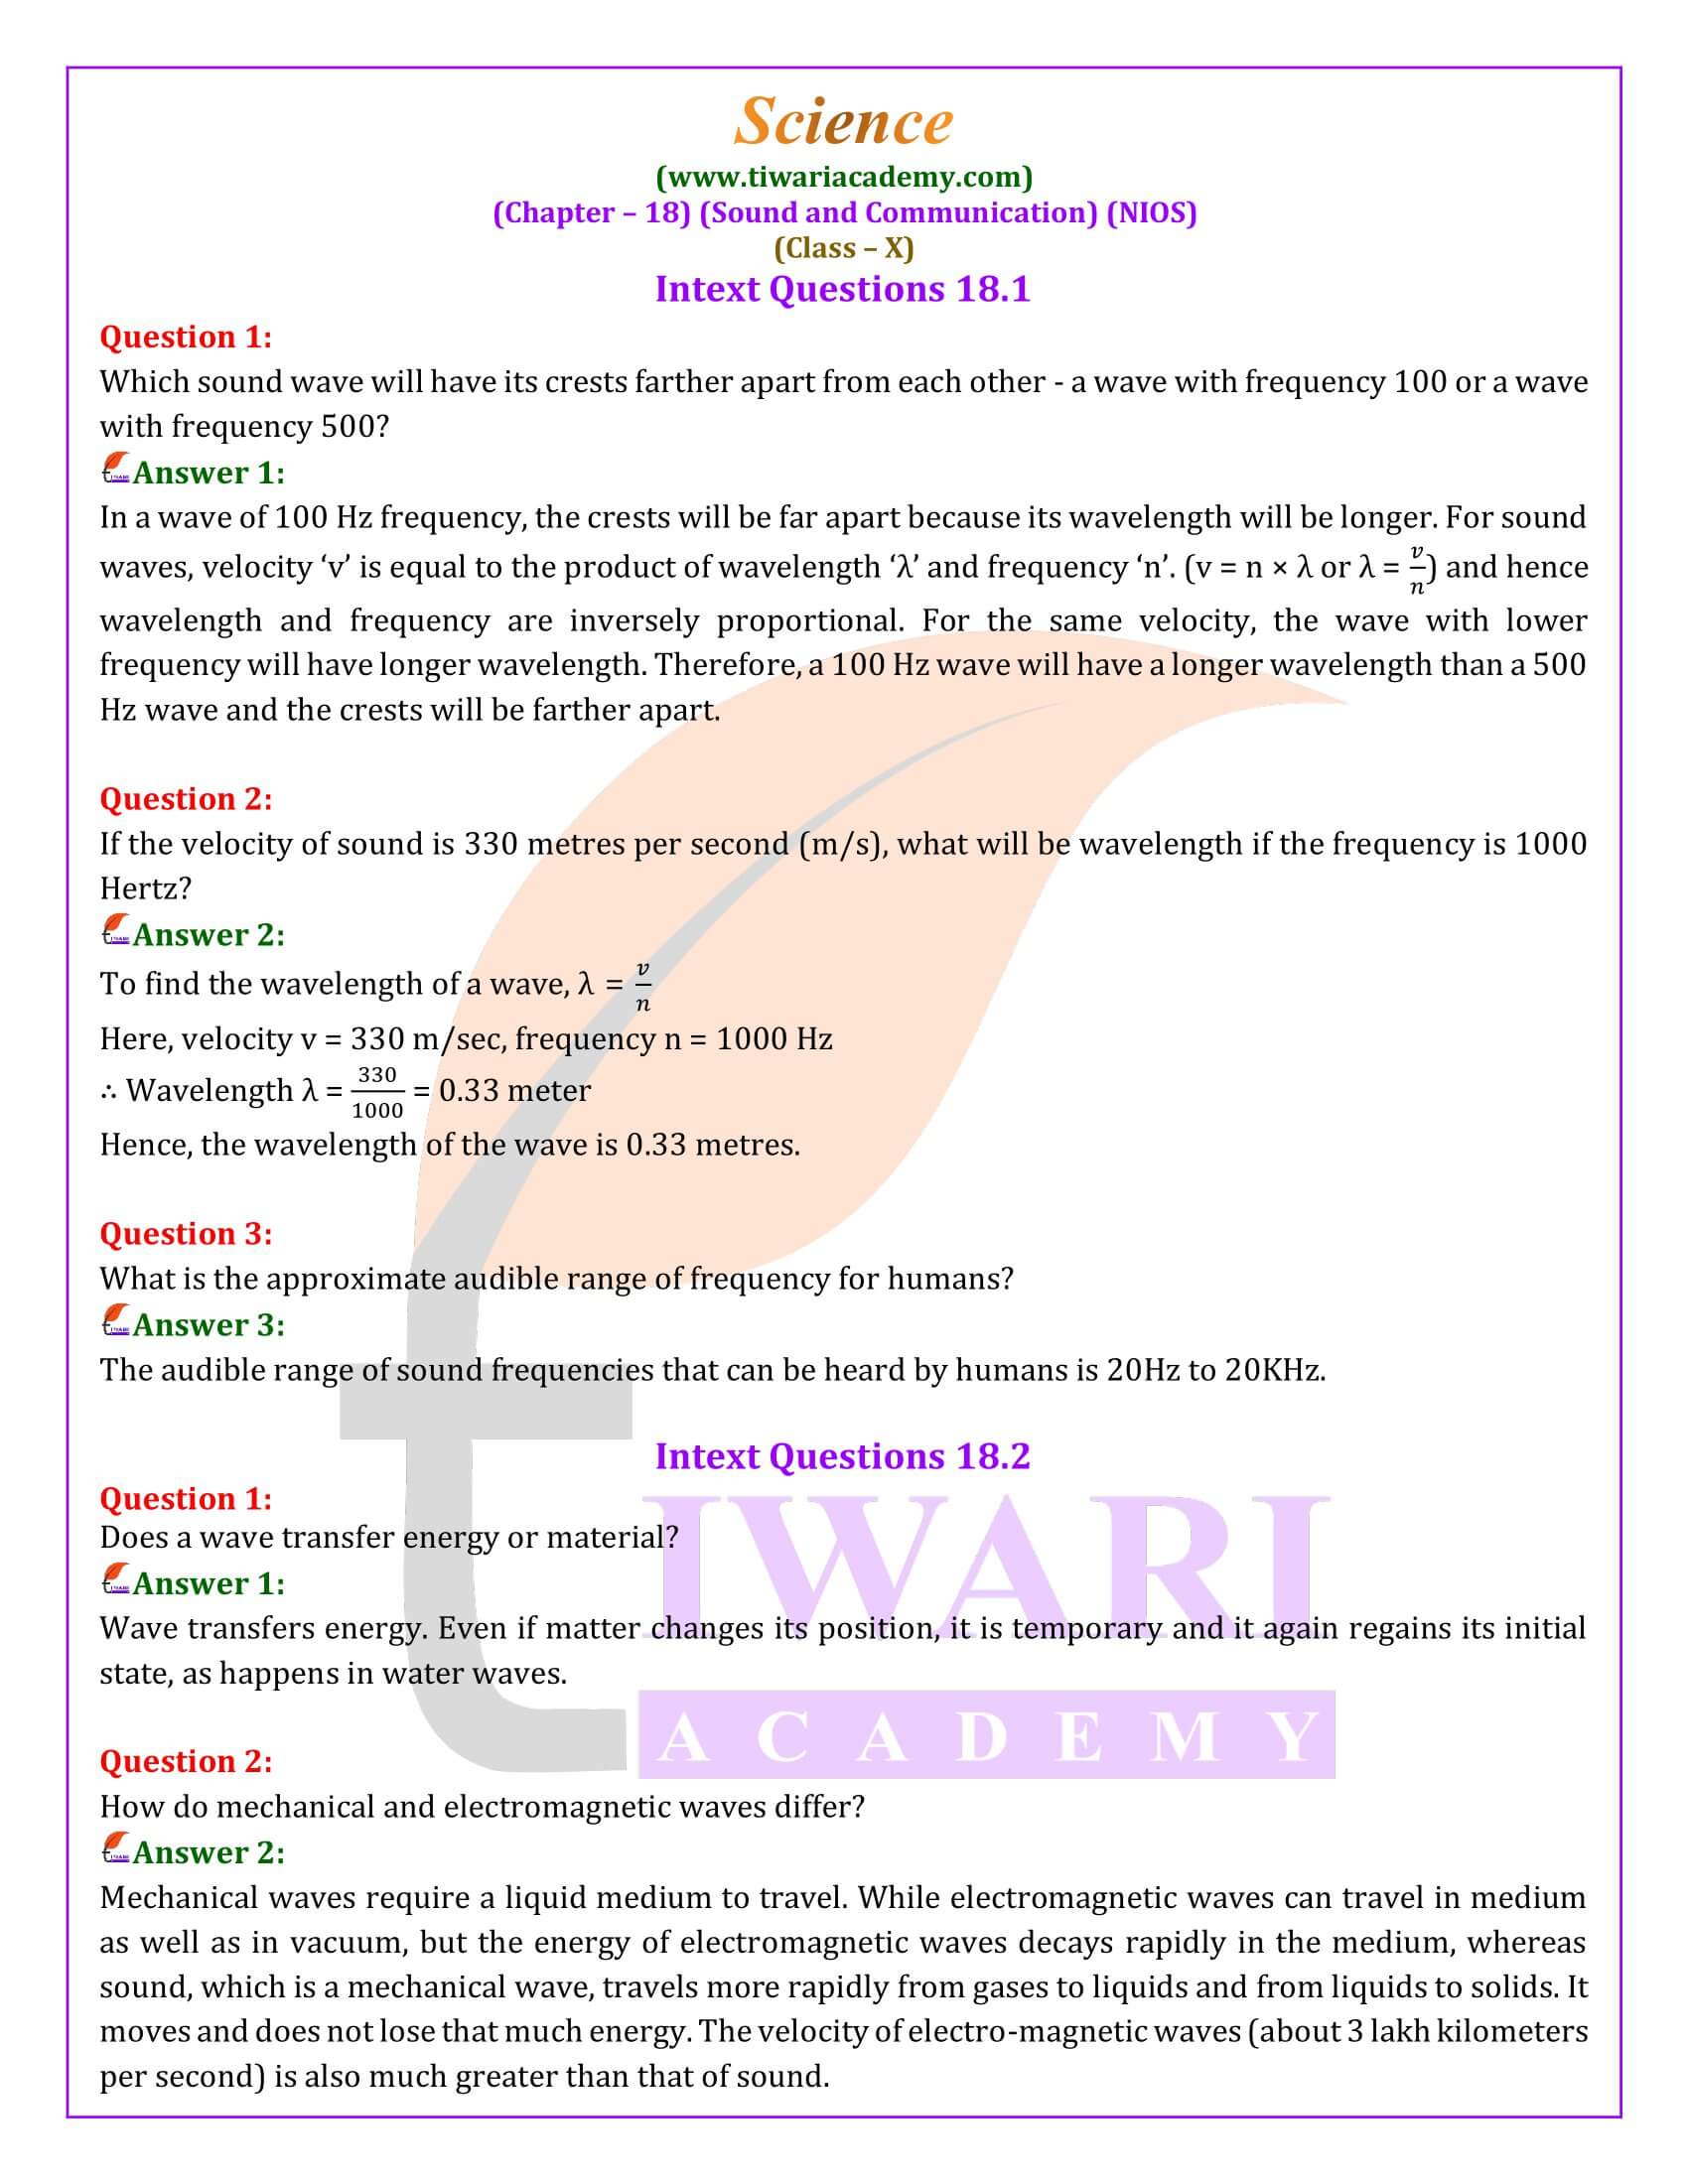 NIOS Class 10 Science Chapter 18 Answers